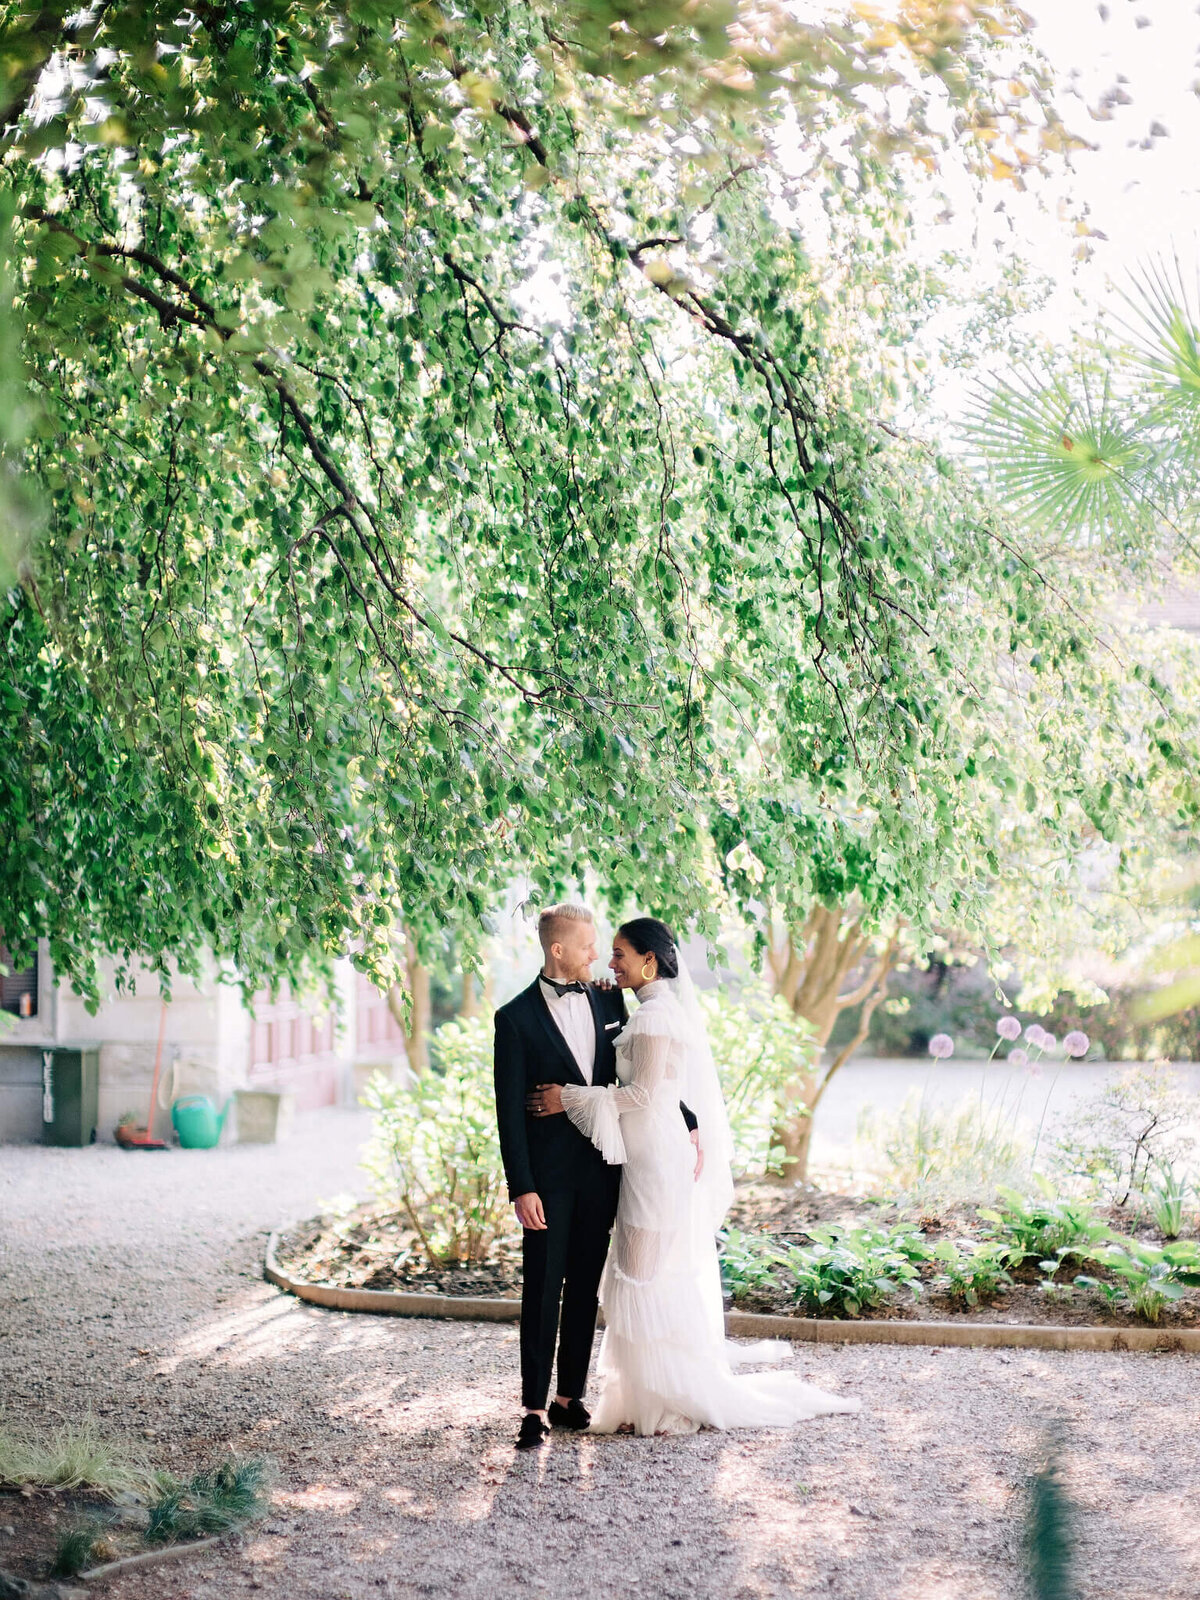 The bride and groom are standing in a garden with plants and trees in the background.